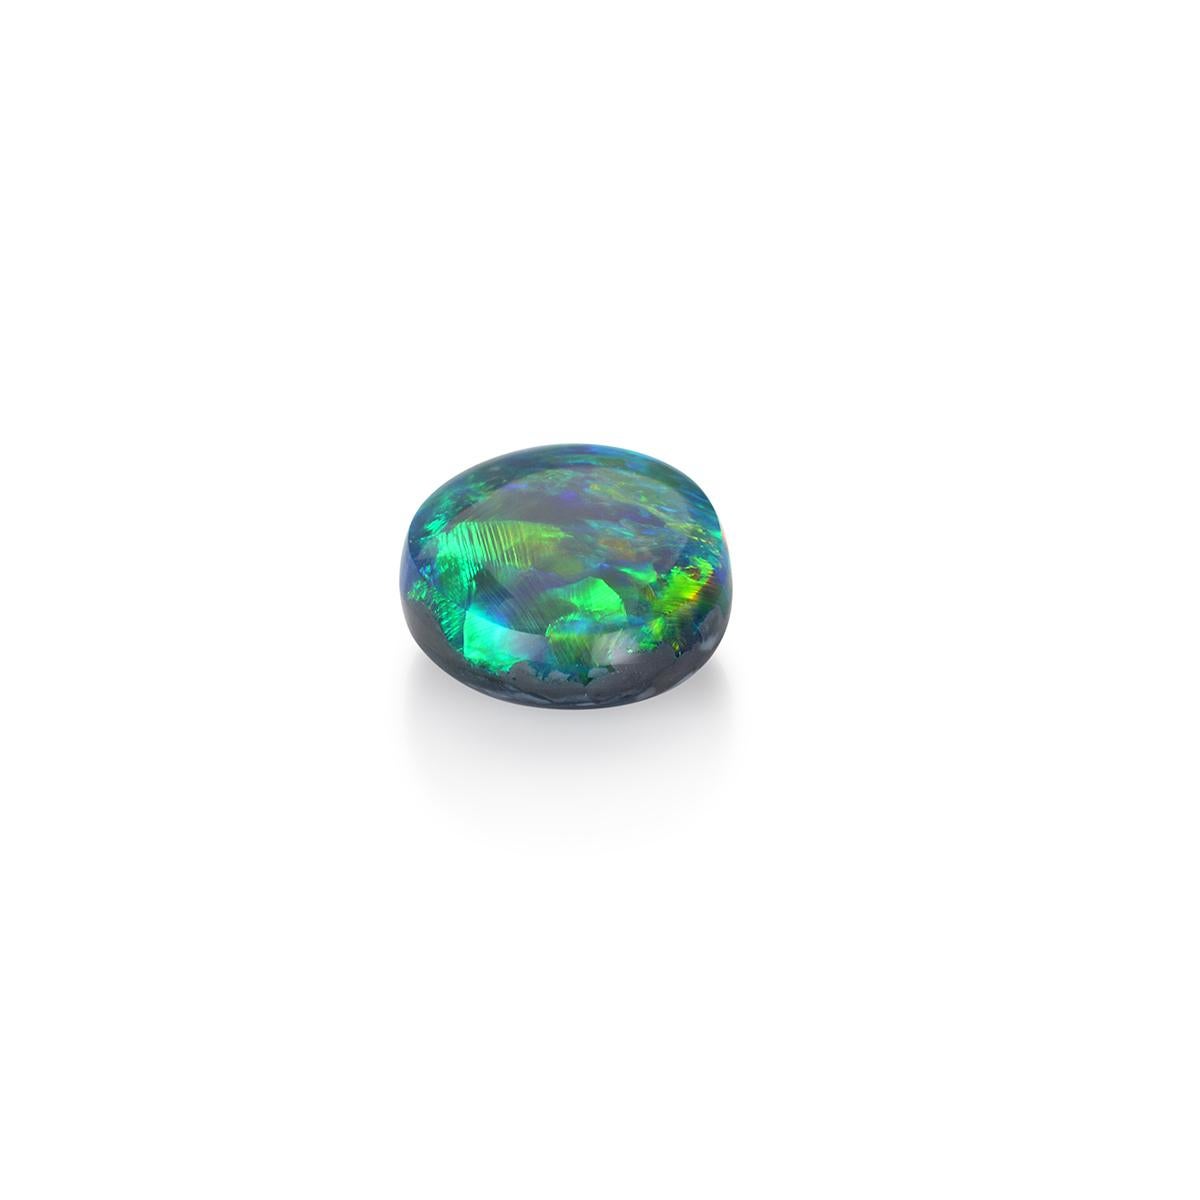 Spectacular in color and shape and exhibiting a stunning range of colors, this 4.75 carat natural black opal is a gem-quality stone for the avid collector or jewelry lover. 

Unlike ordinary opals, black opals have carbon and iron oxide trace